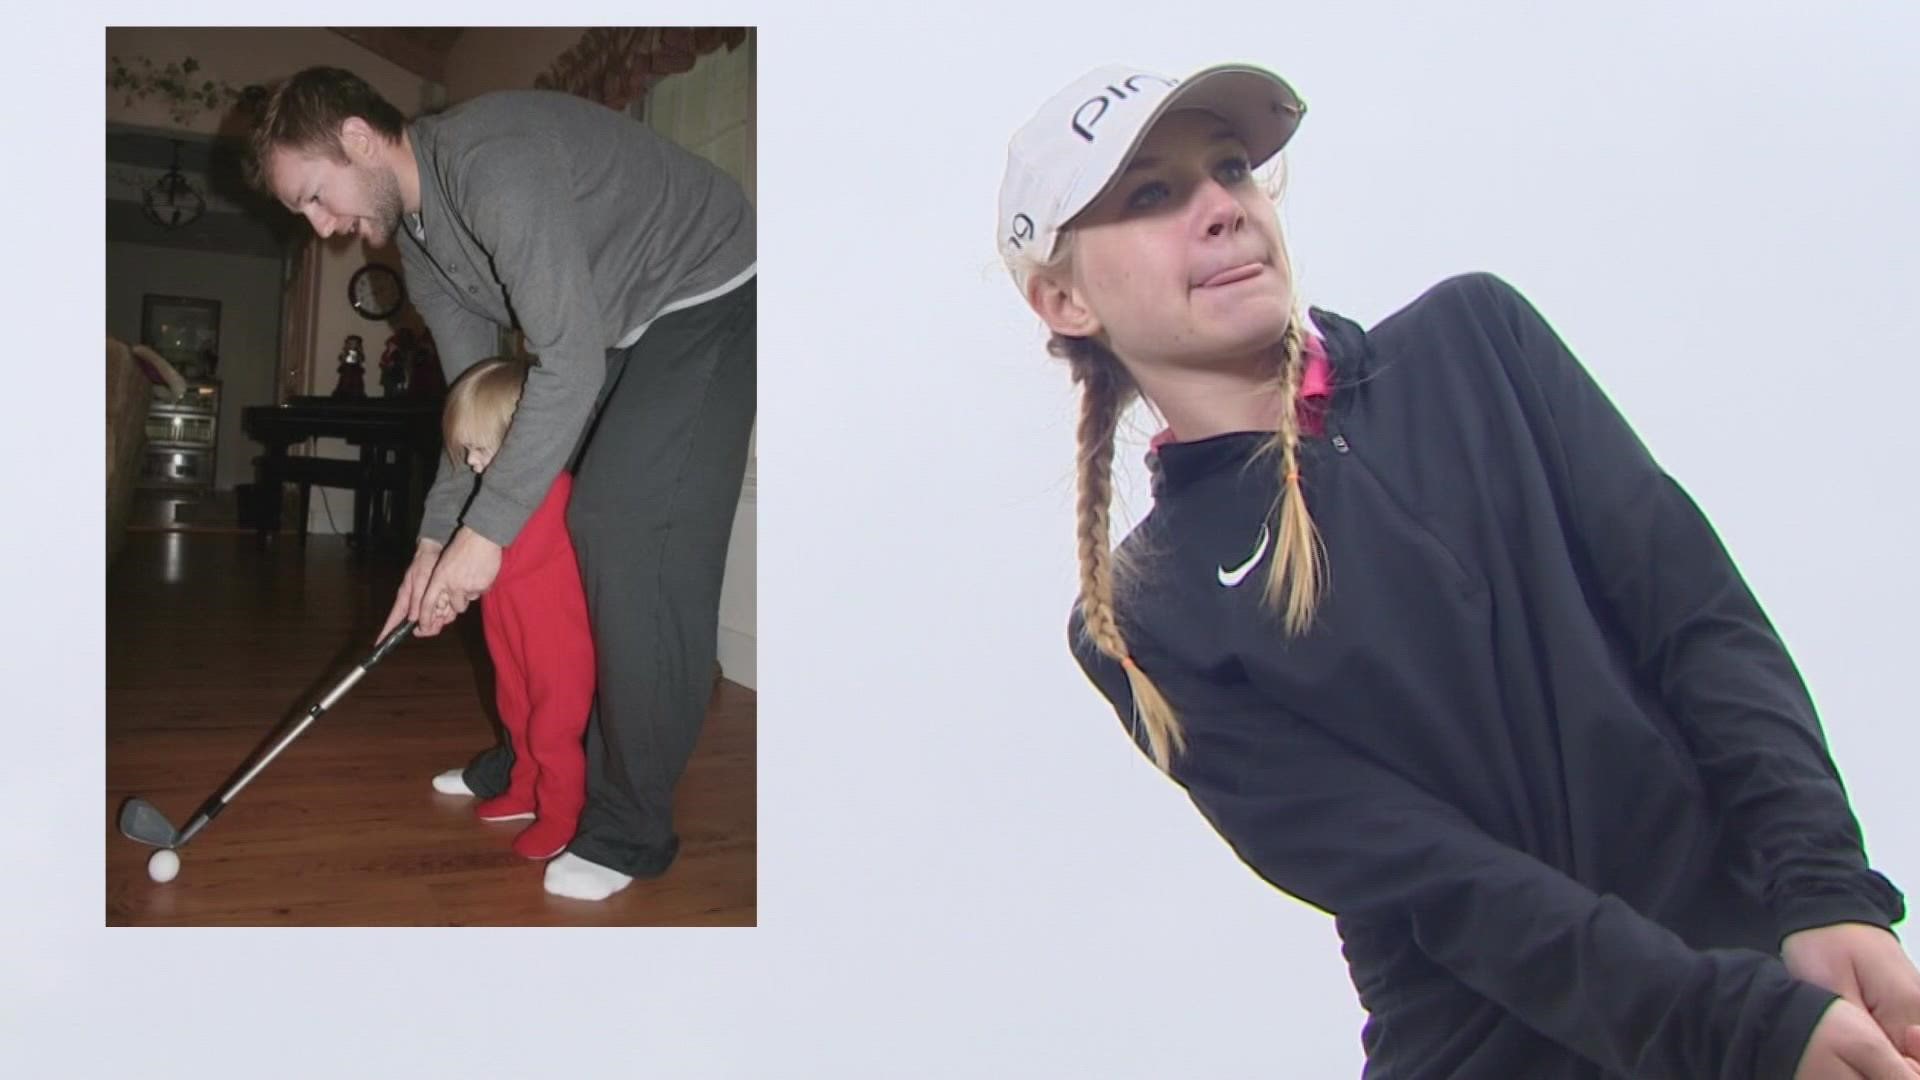 Nothing can drive a wedge between Delaney Anderson and her father, Garrett.